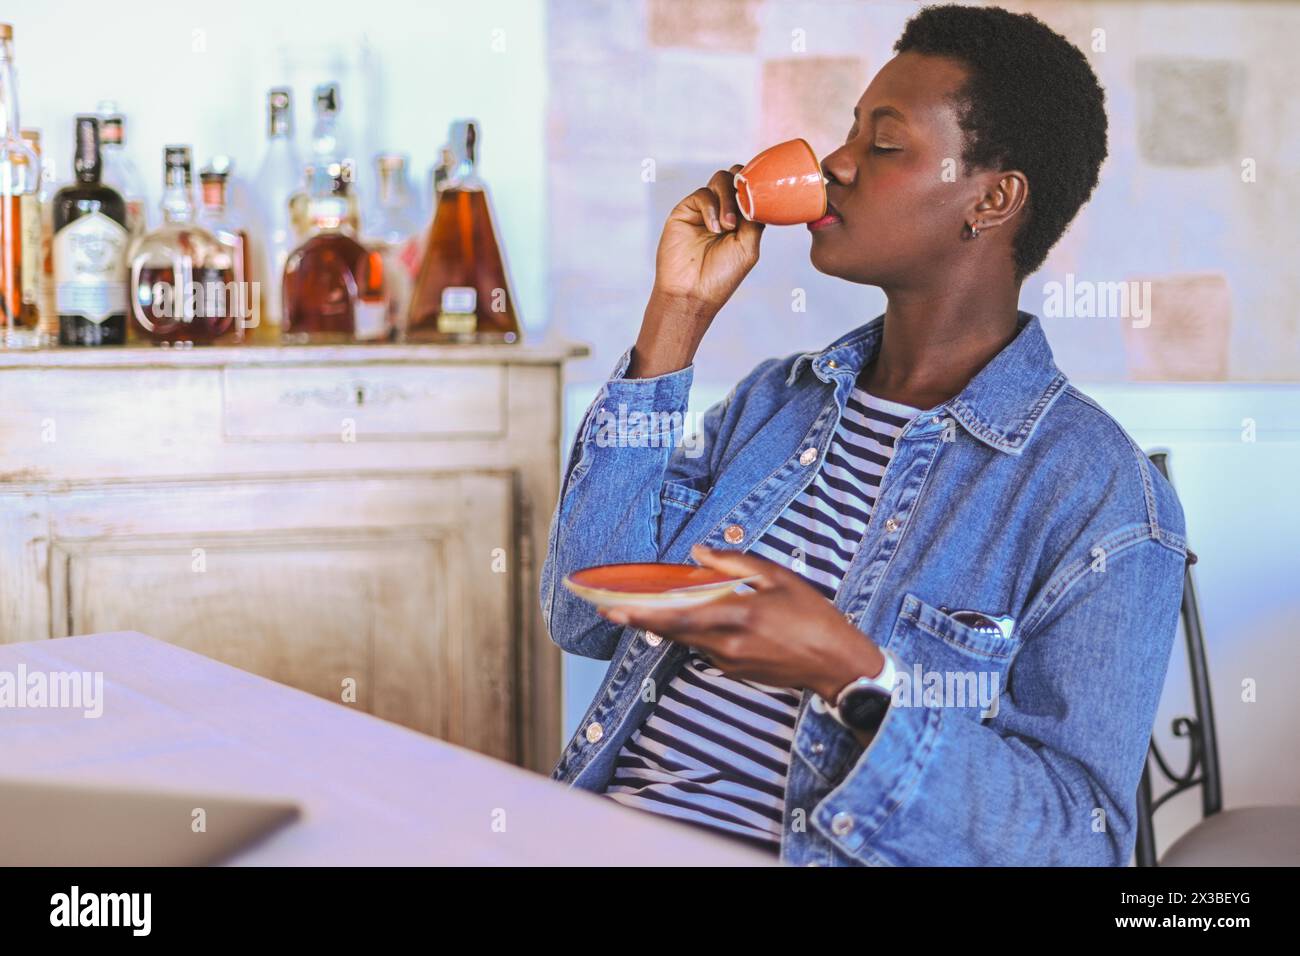 Content woman drinking from an espresso cup in a relaxing restaurant setting Stock Photo